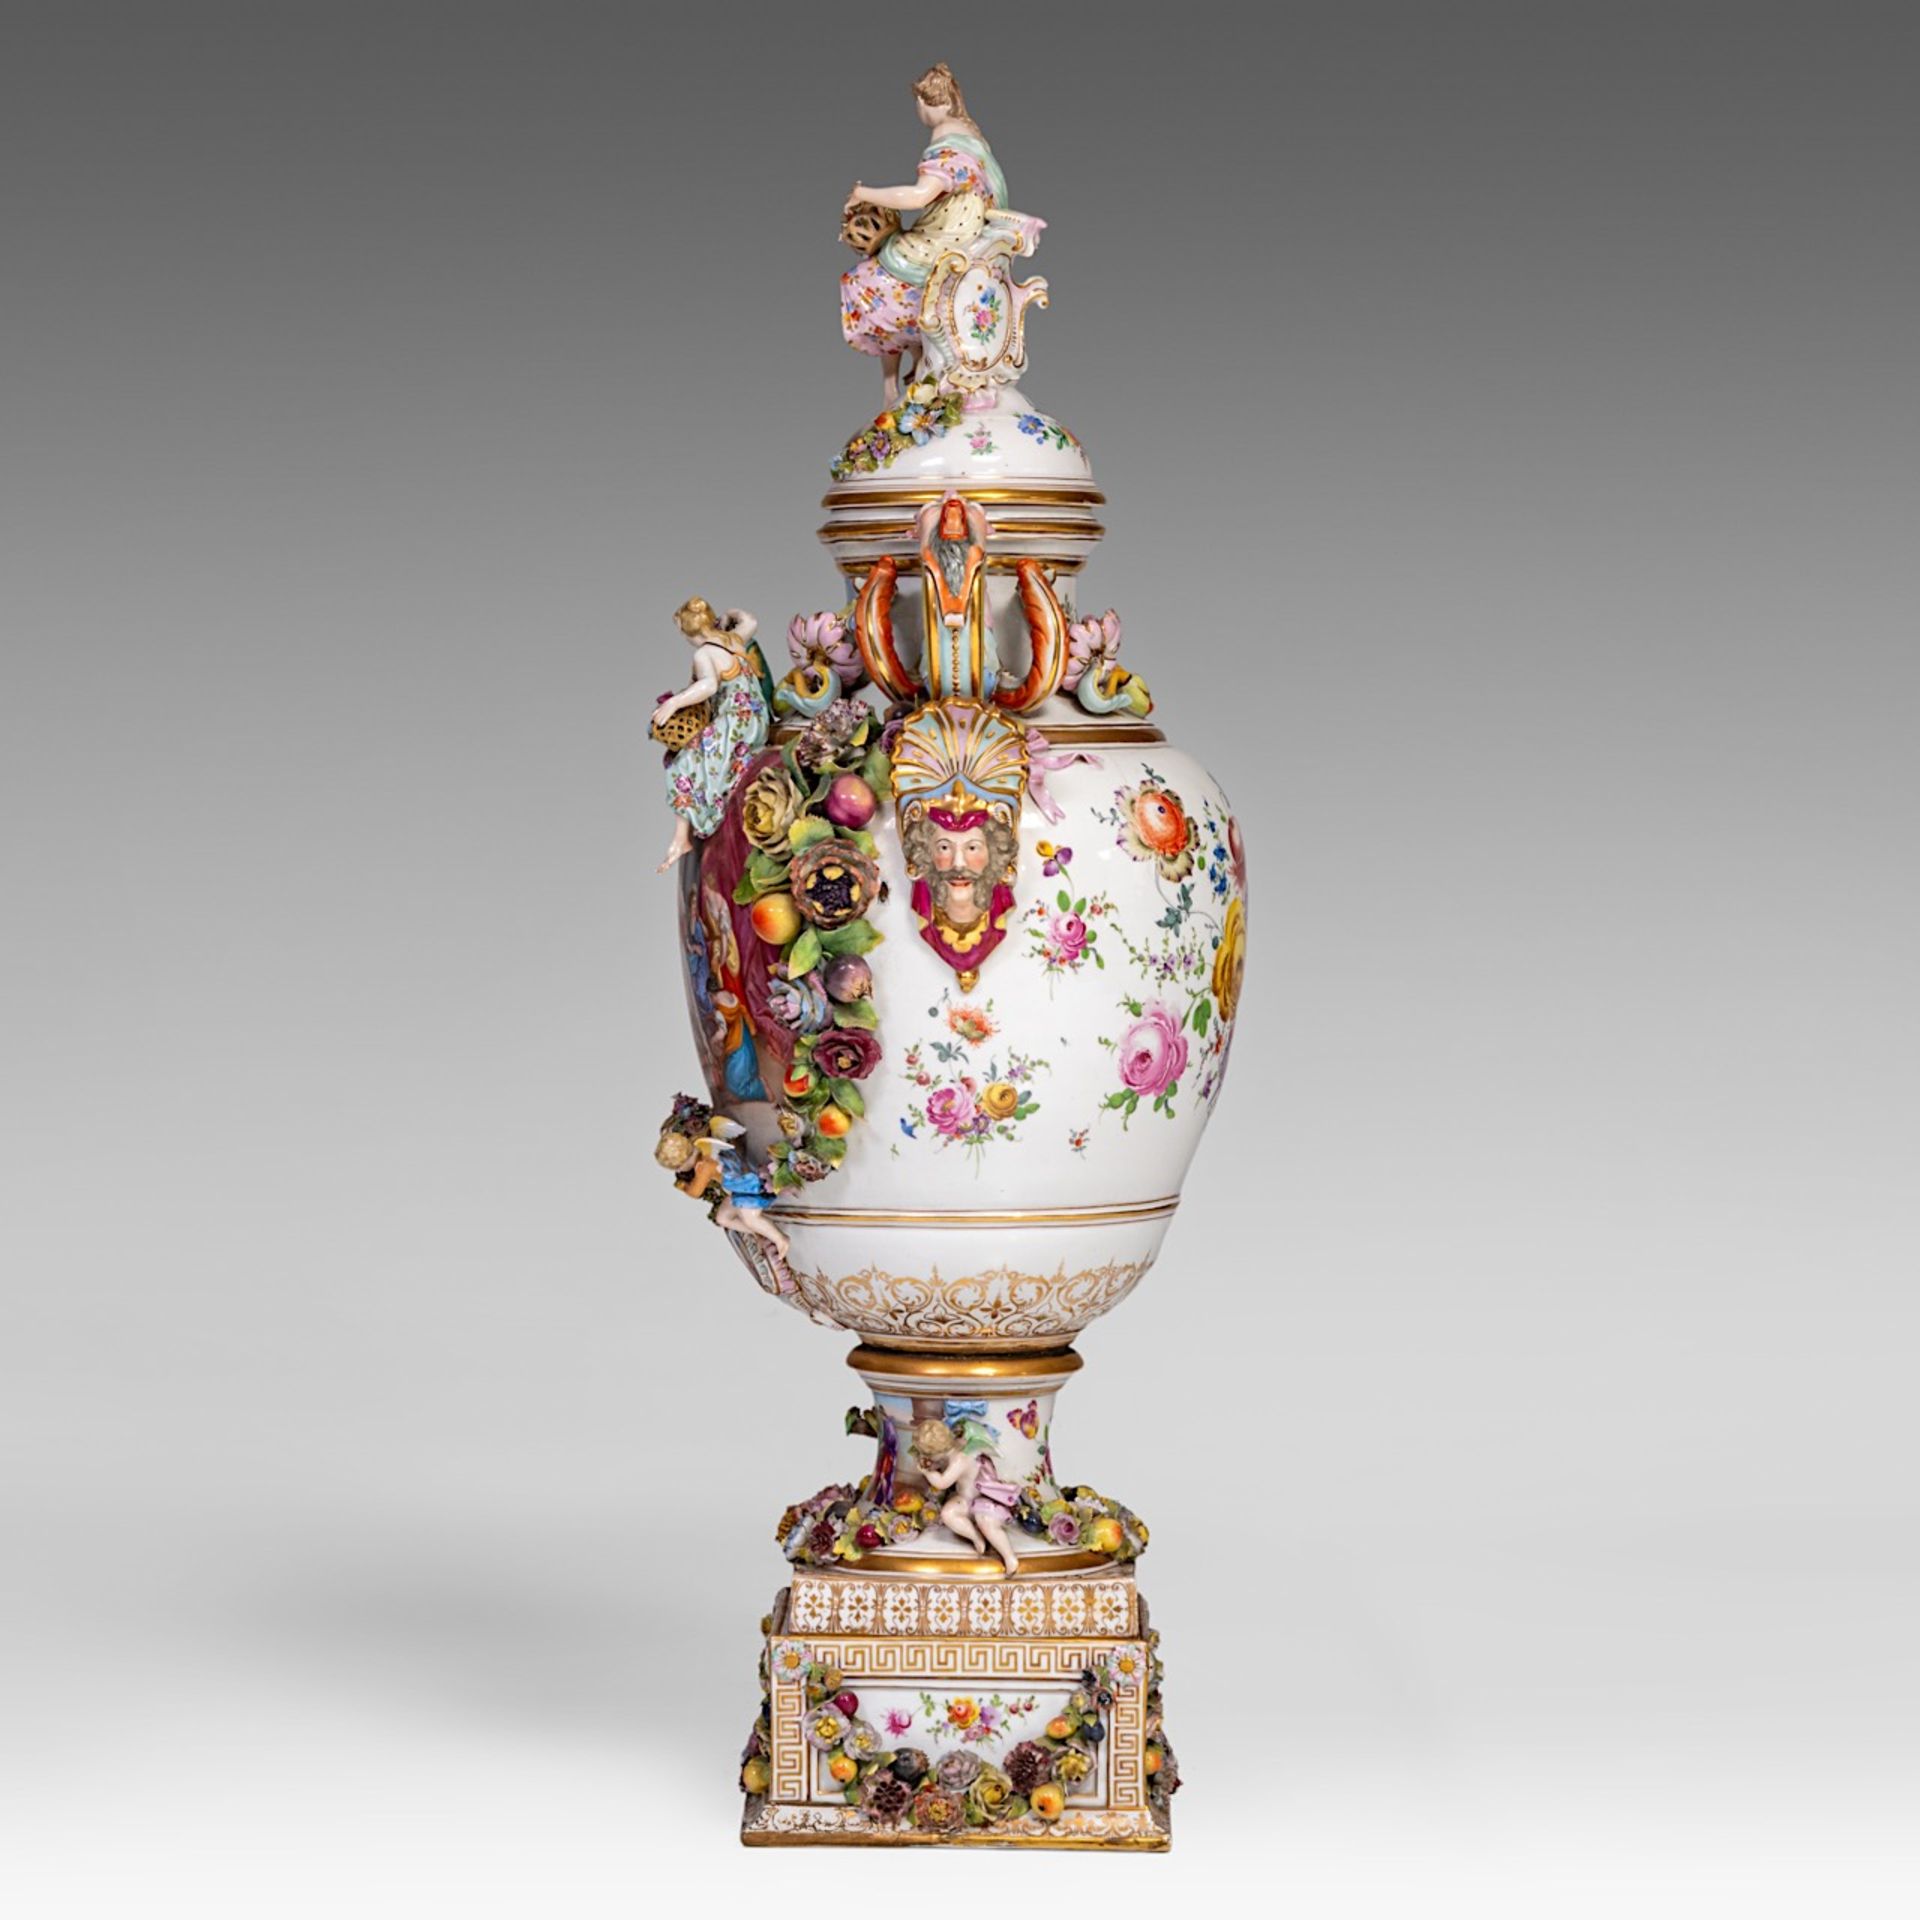 A very imposing Saxony porcelain vase on stand, Postschappel manufactory, Dresden, H 107 cm (total) - Image 3 of 23